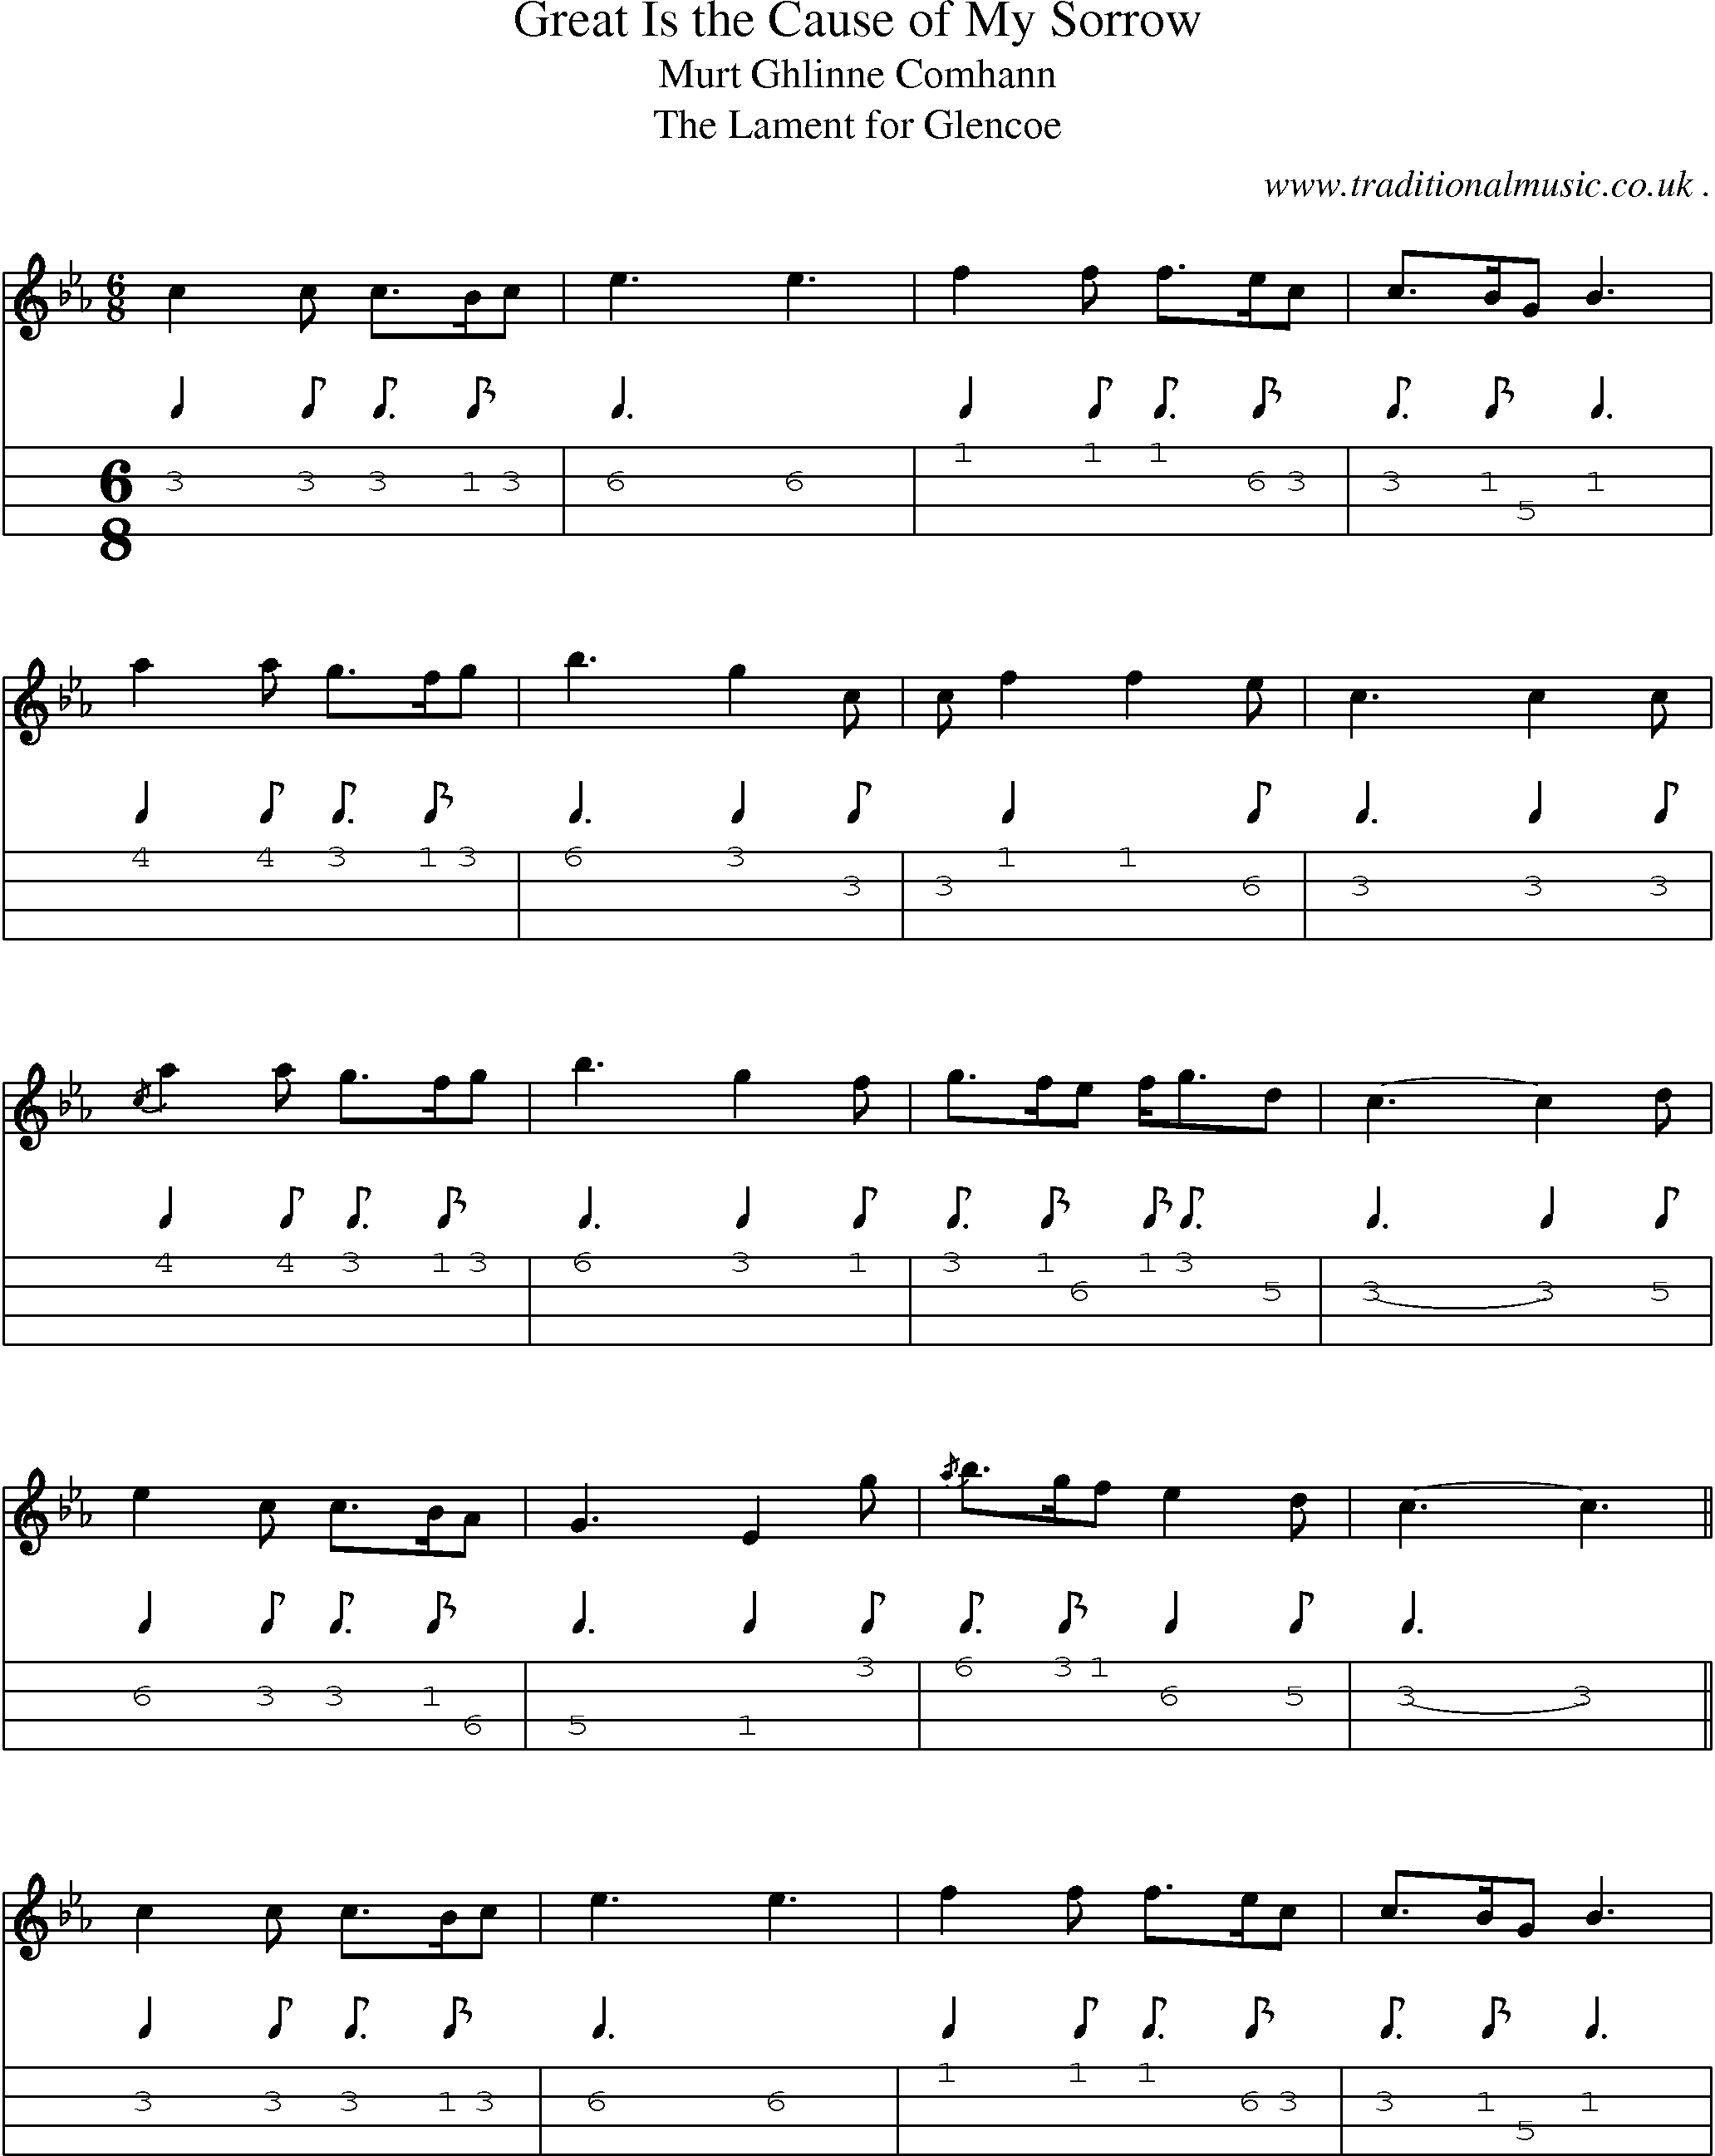 Sheet-music  score, Chords and Mandolin Tabs for Great Is The Cause Of My Sorrow